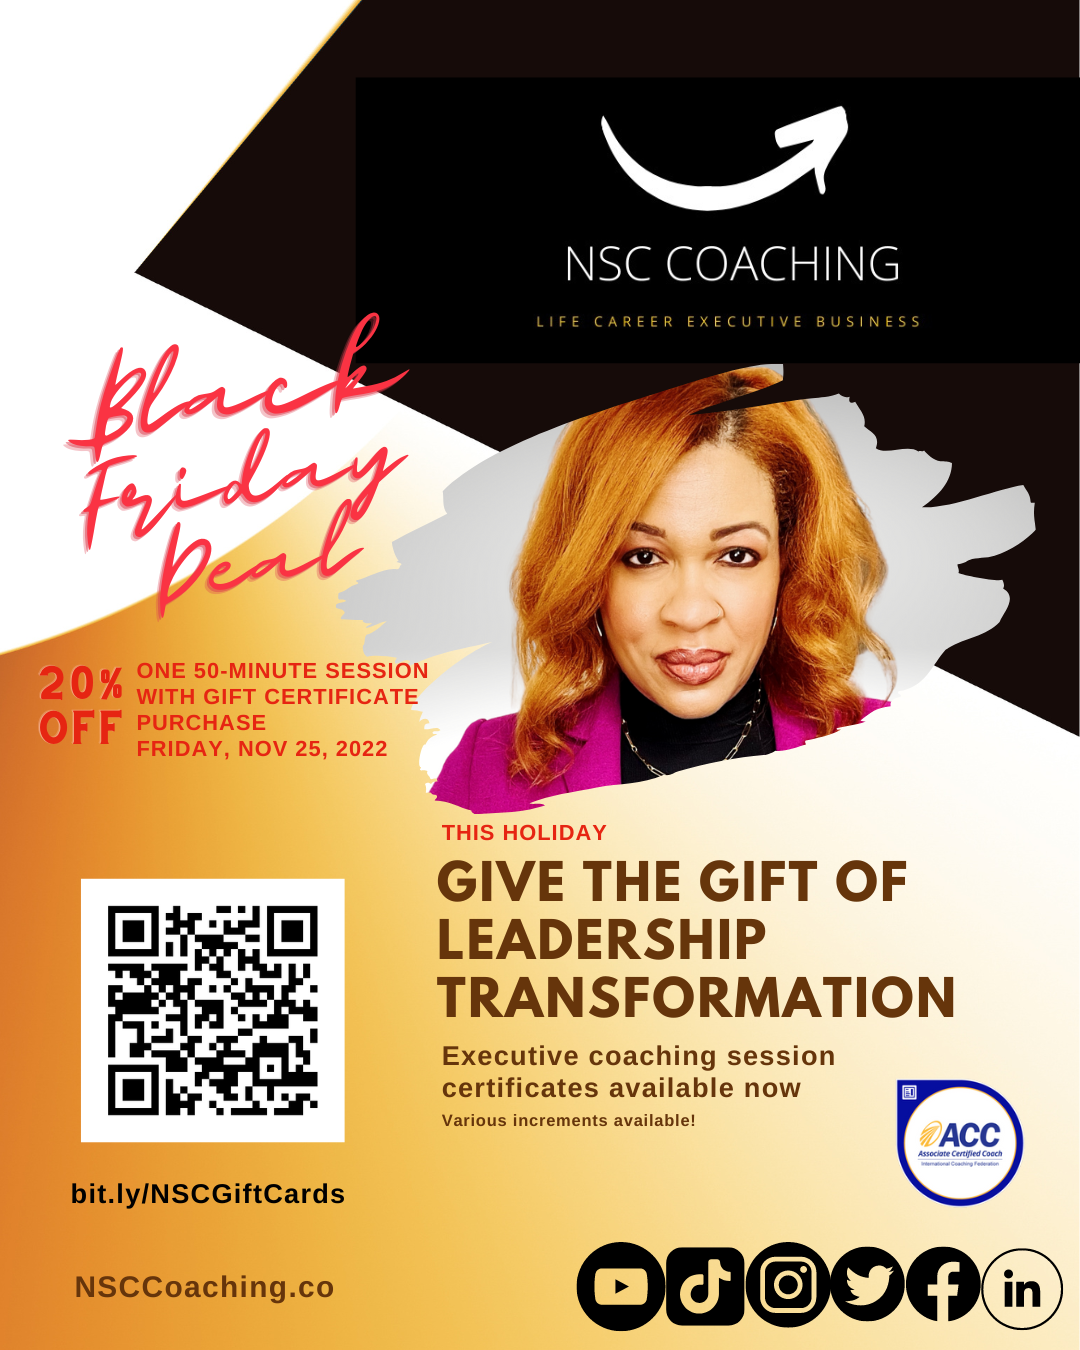 Give the gift of leadership transformation.